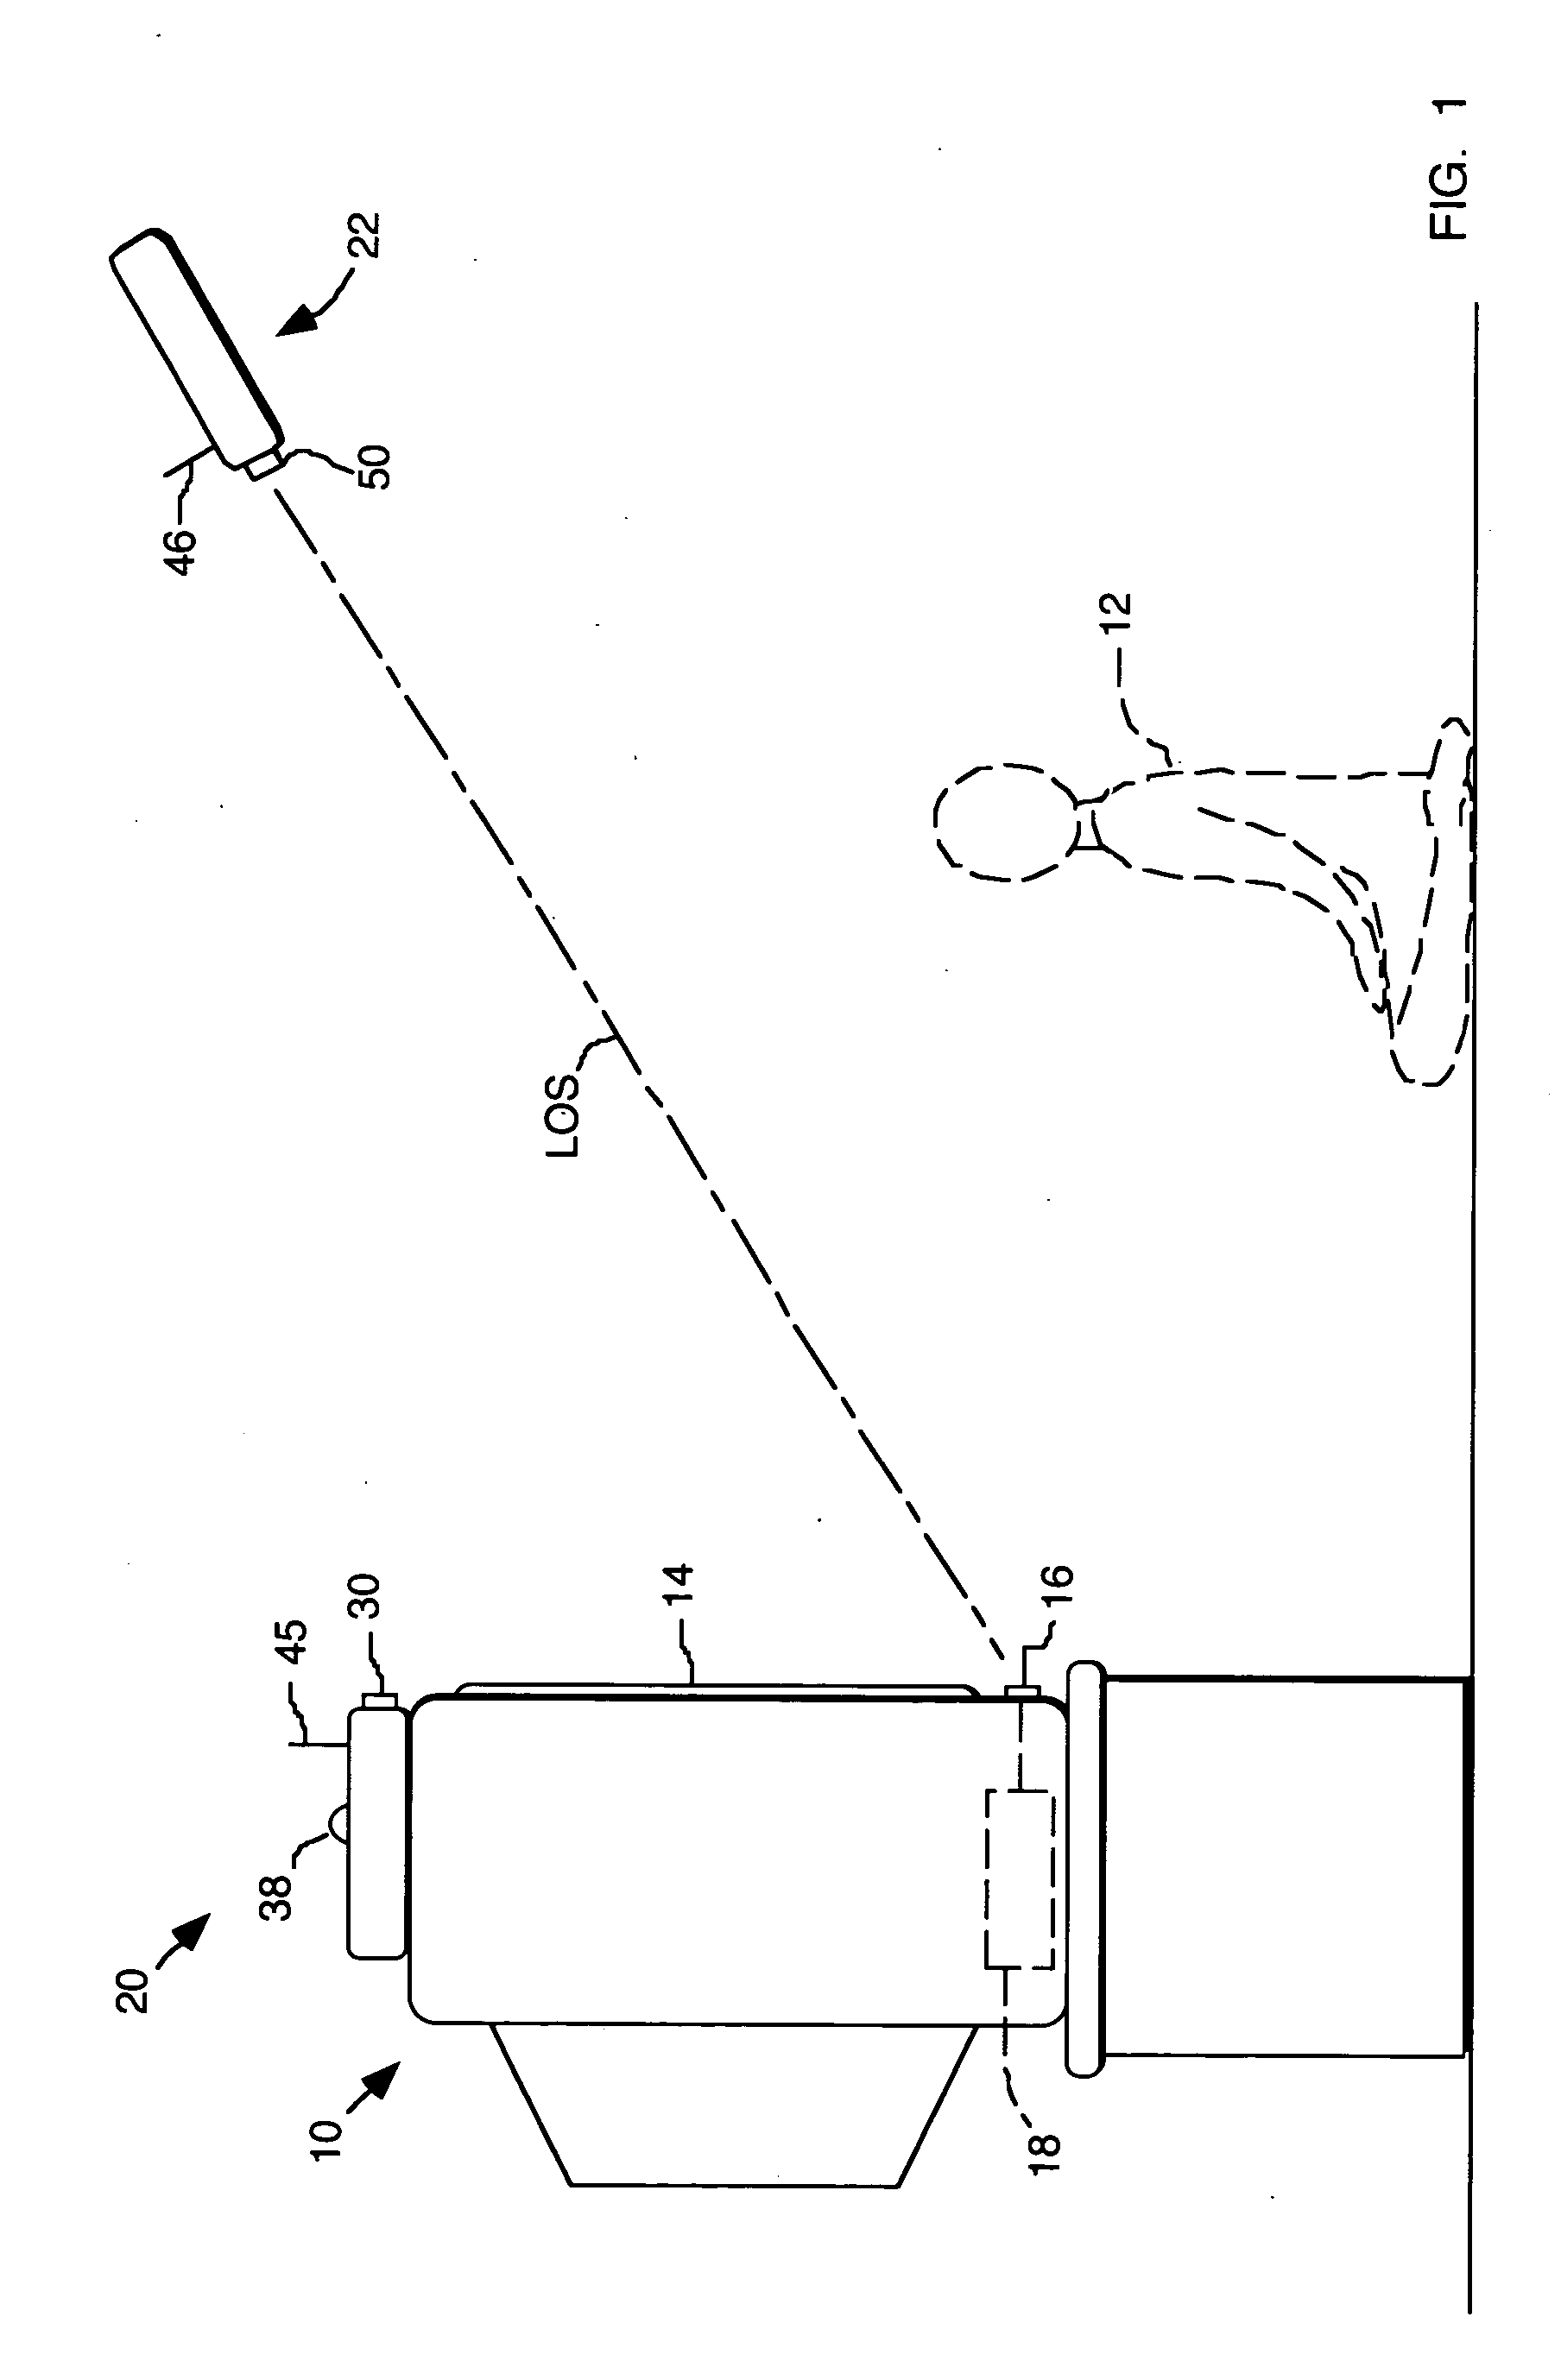 Controlling viewing distance to a television receiver